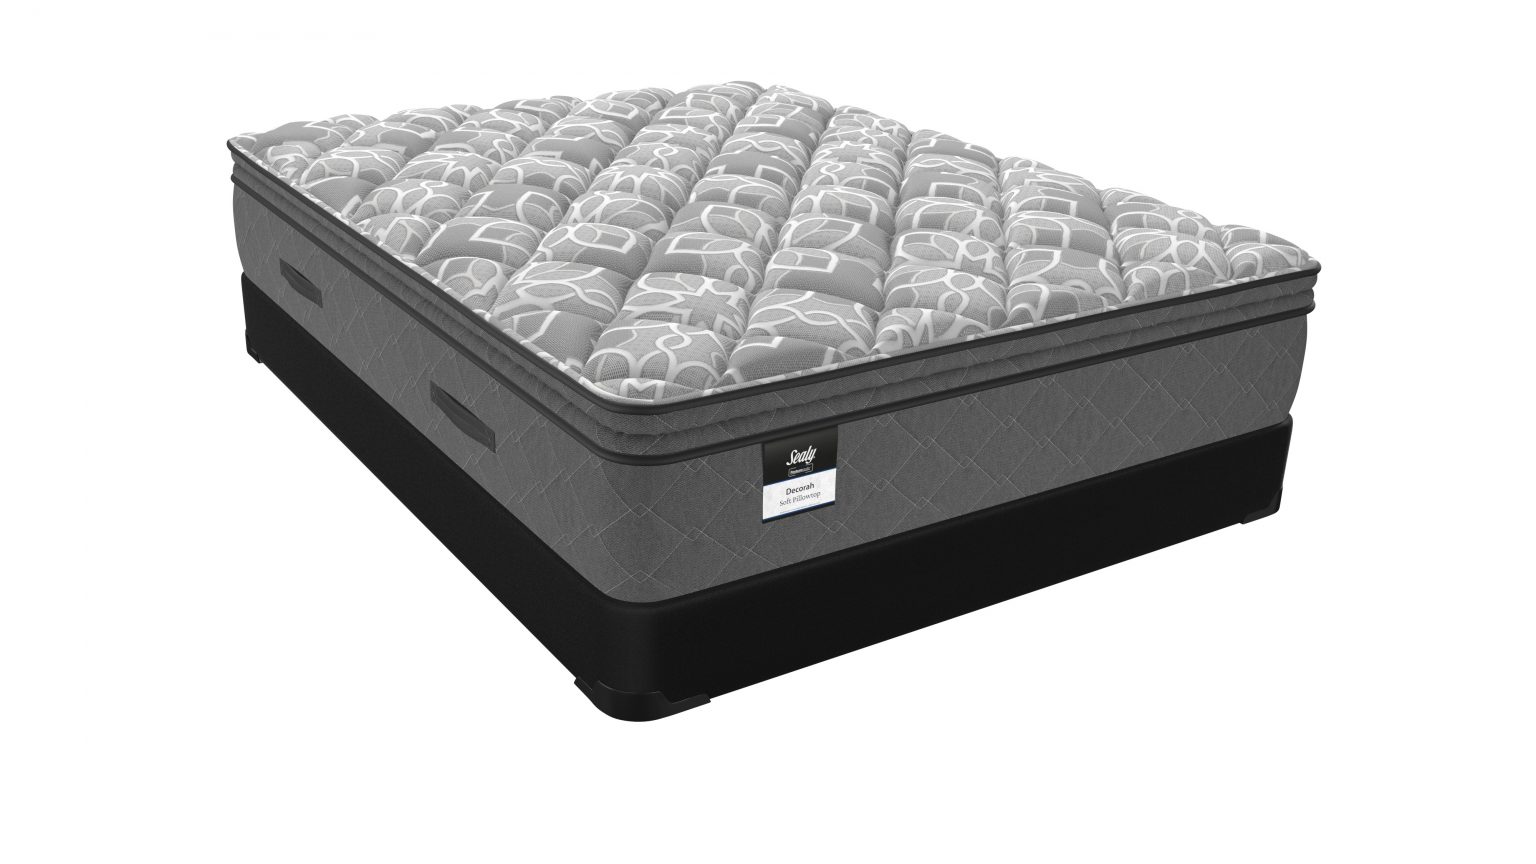 review on sealy posturpedic pillow top mattresses